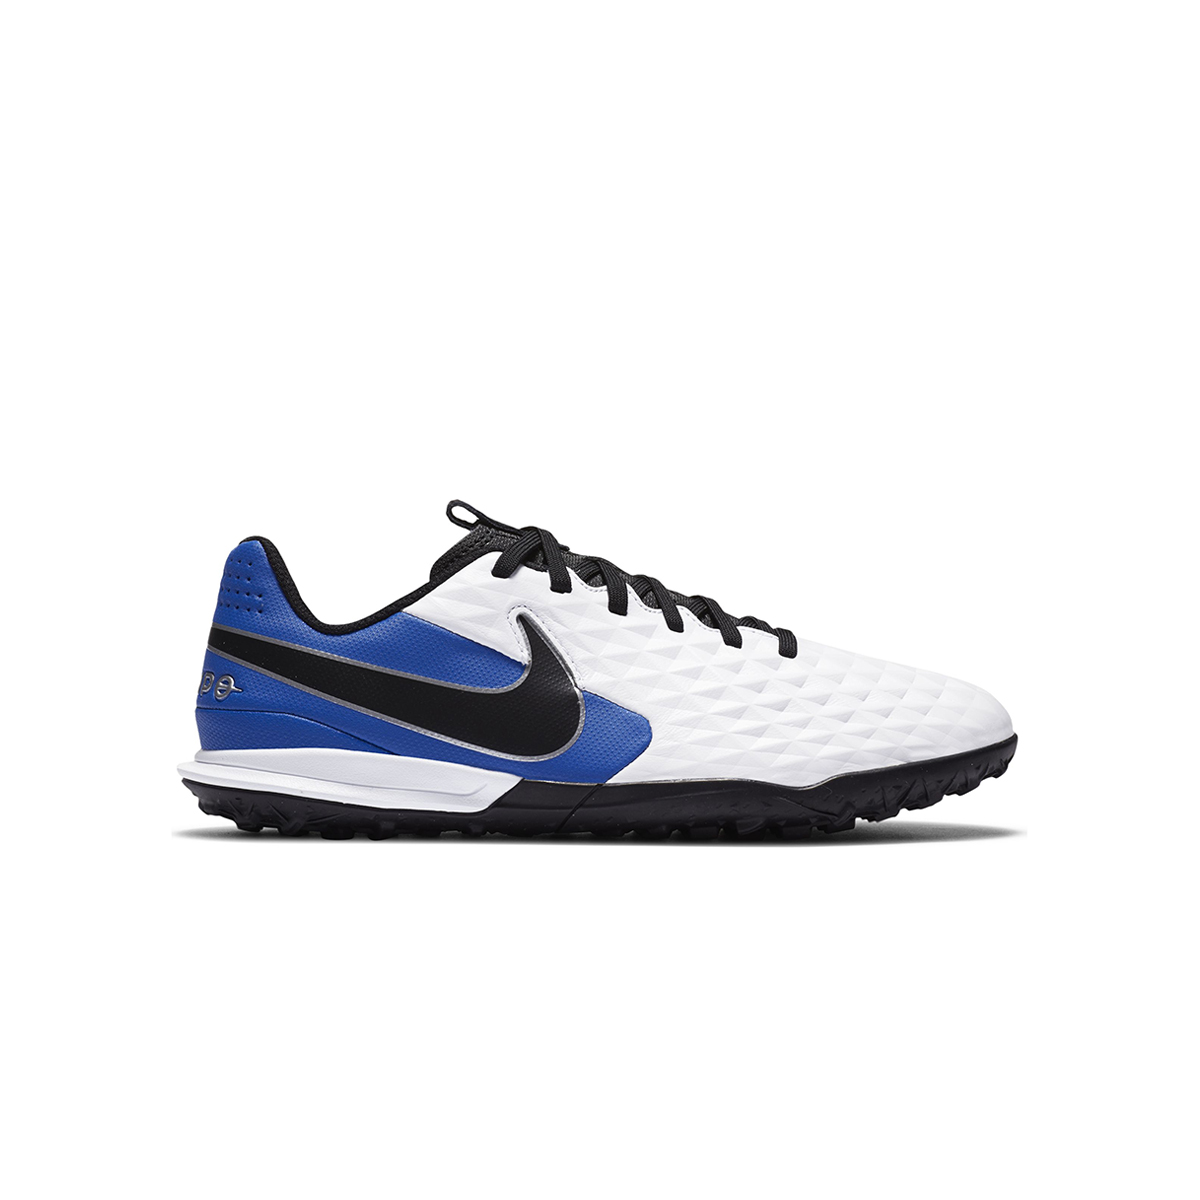 Botines Nike Legend 8 Academy TF Jr,  image number null